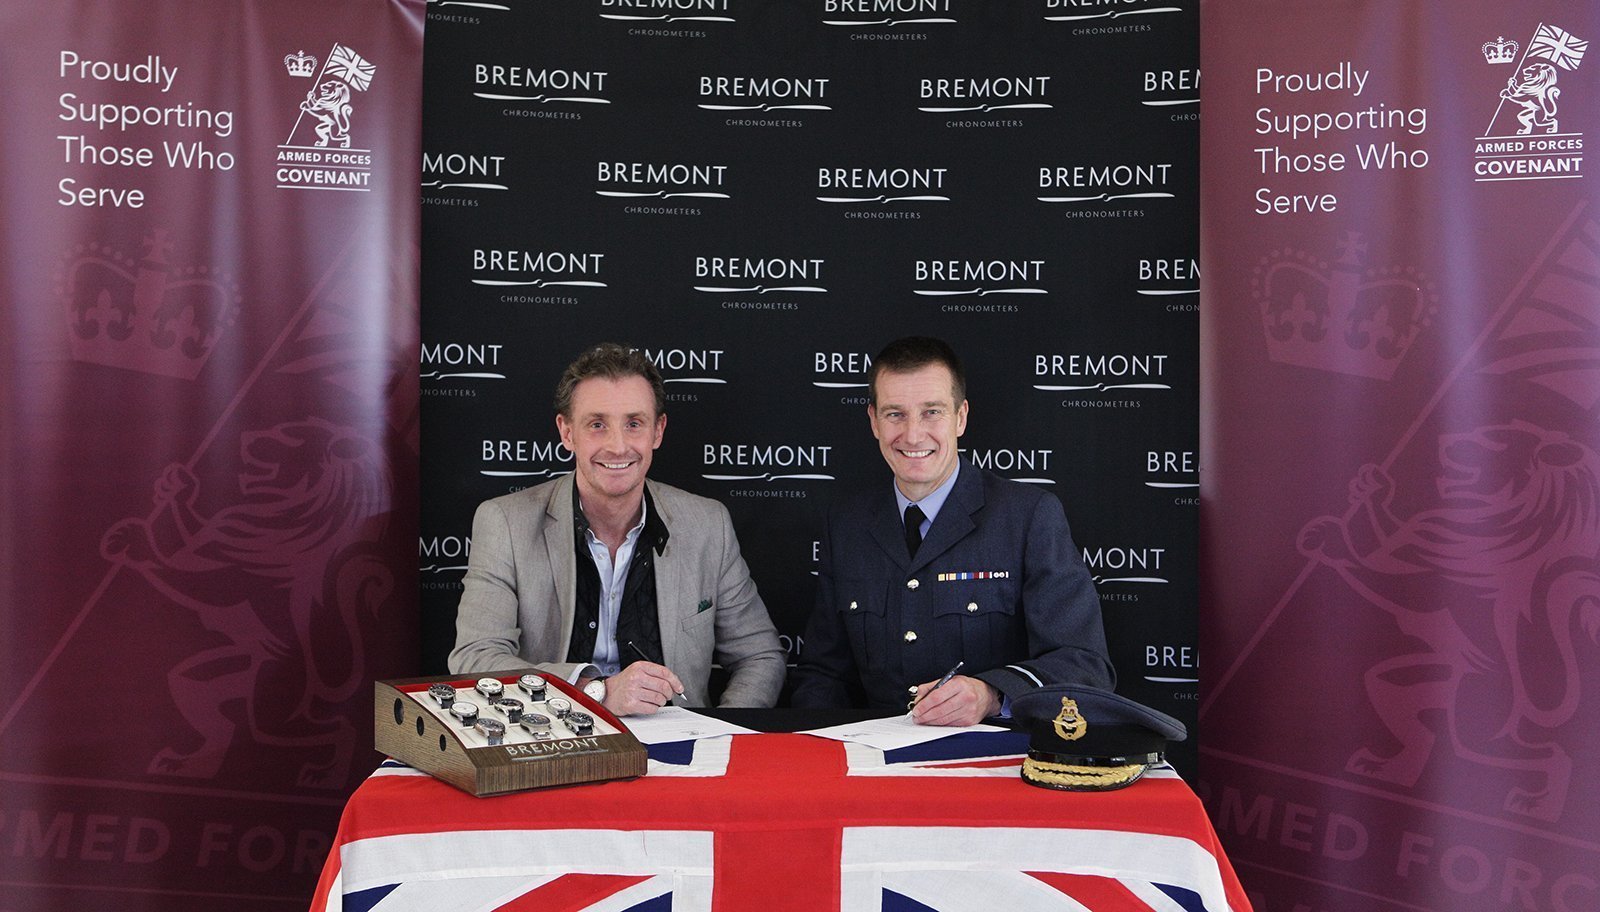 BREMONT IS THE FIRST WATCH COMPANY TO SIGN  THE ARMED FORCES COVENANT